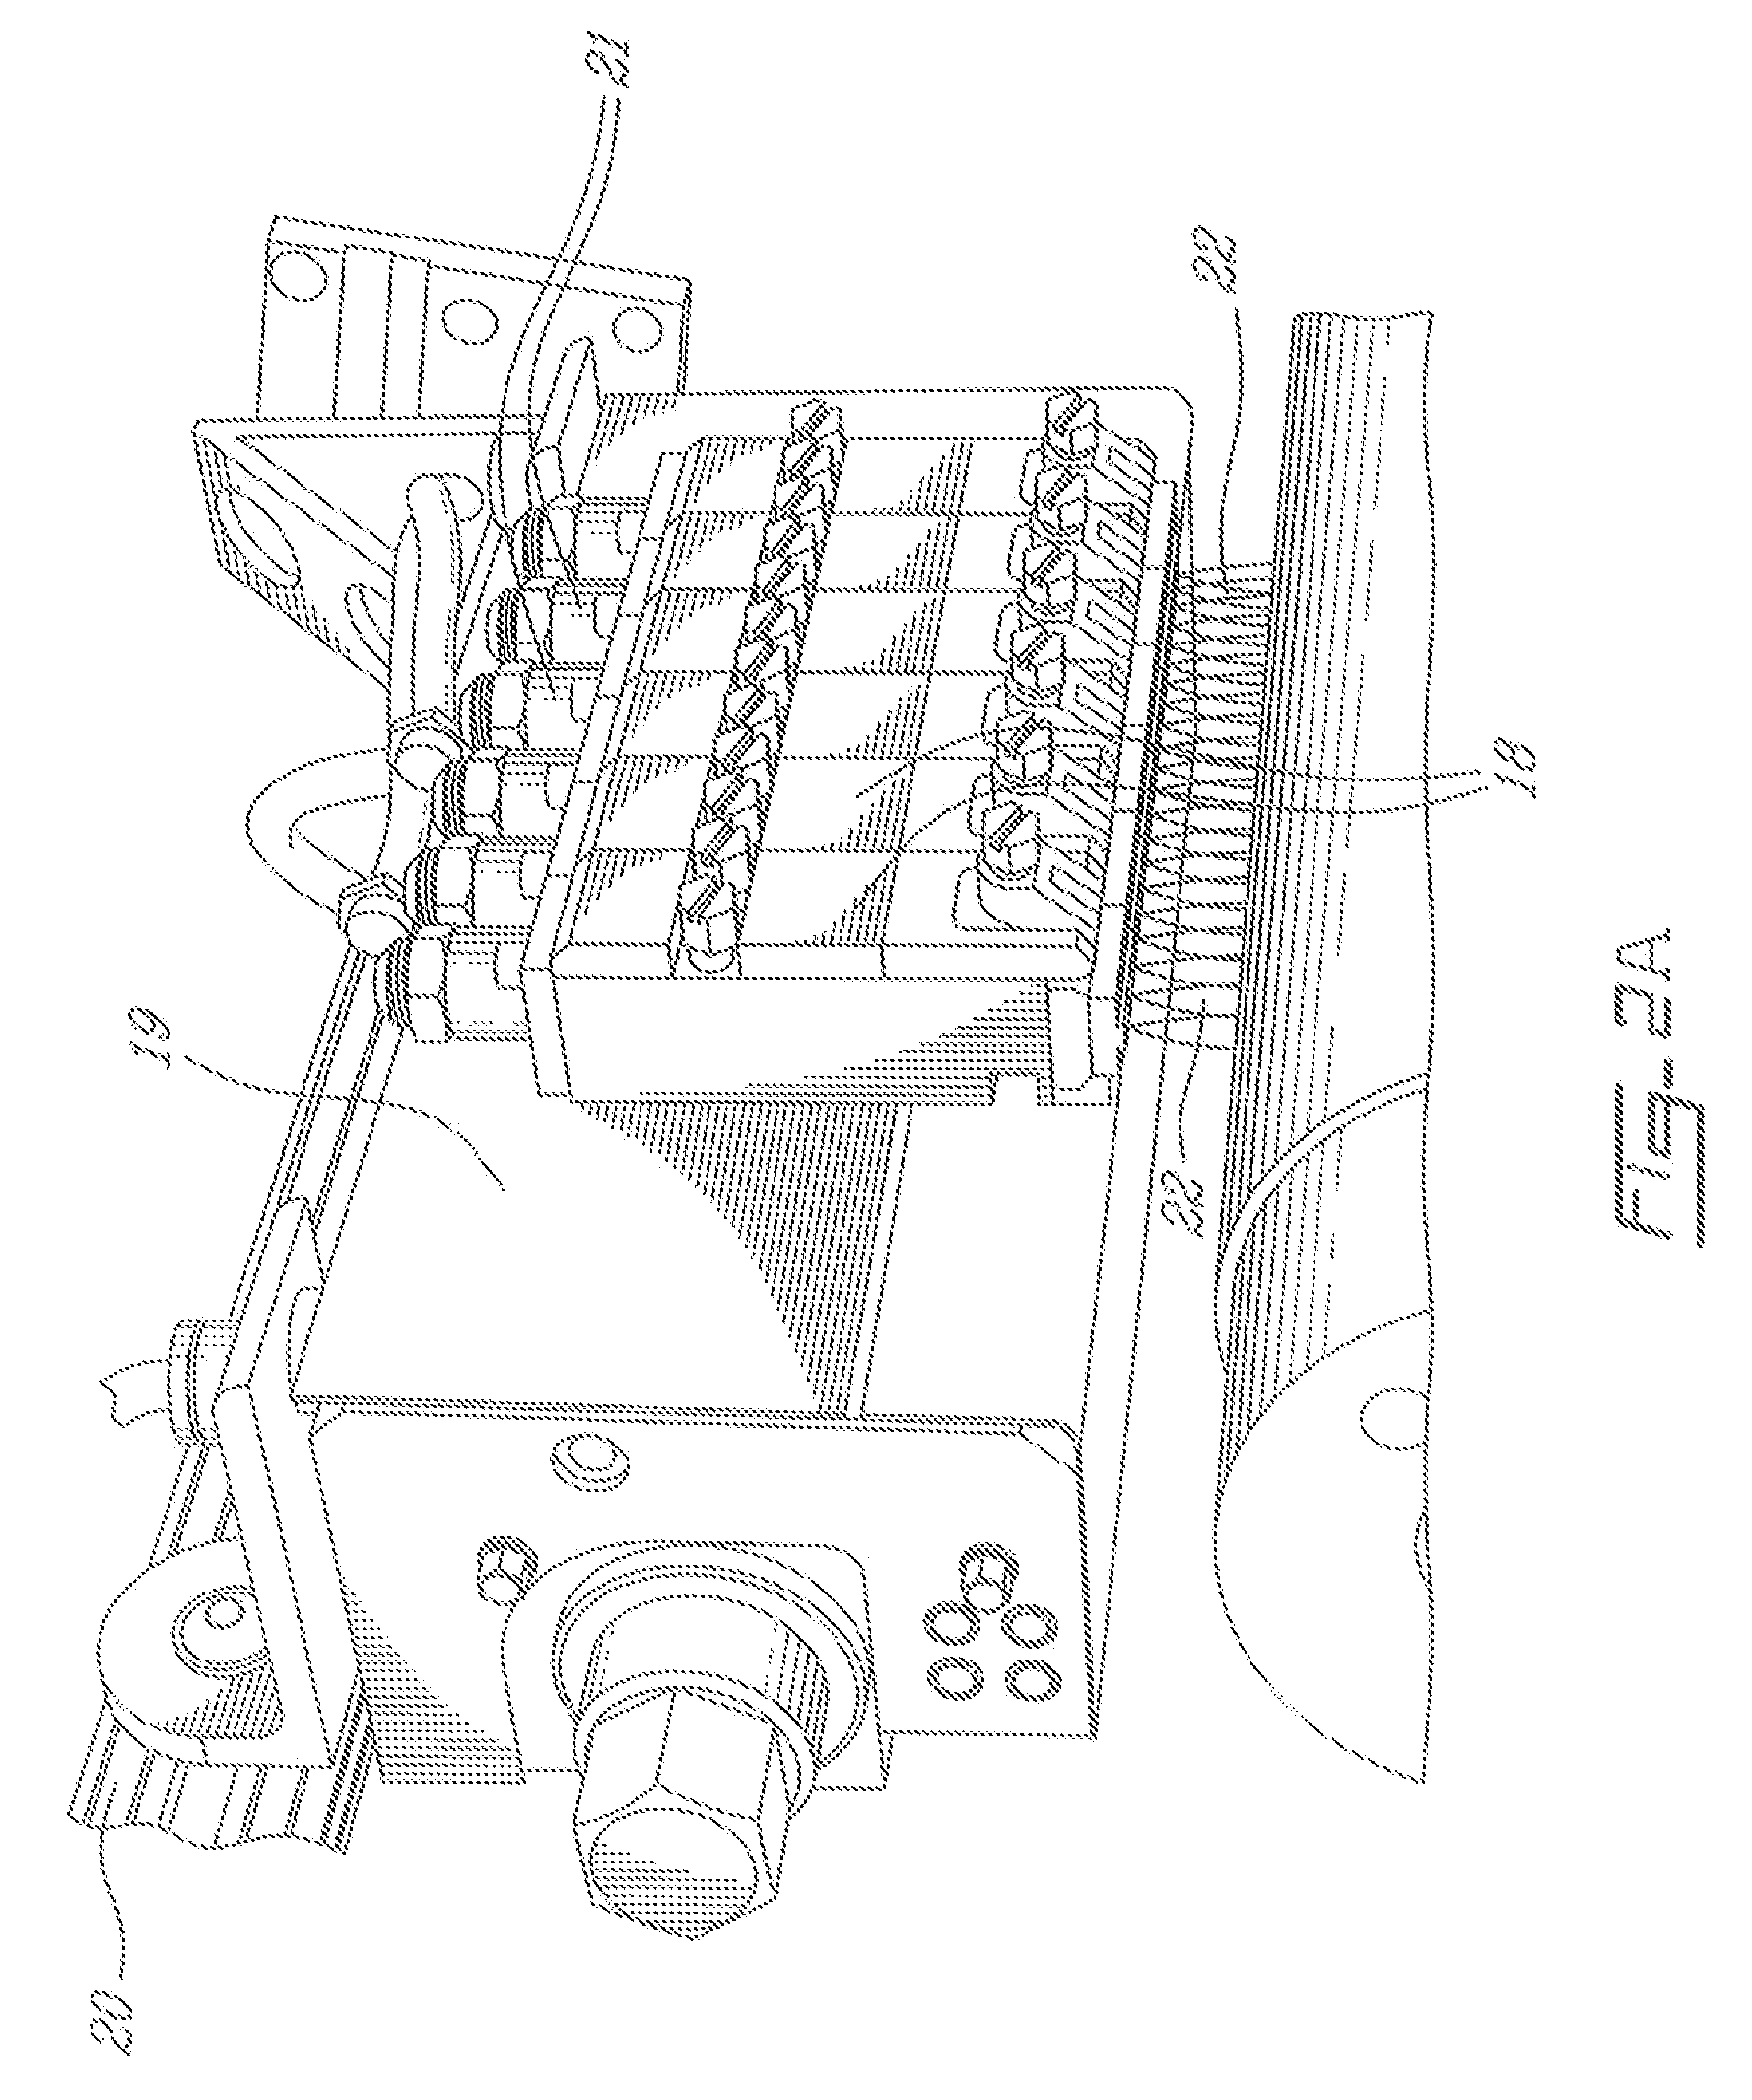 System and method of applying a gel coat brush stroke pattern over an image surface